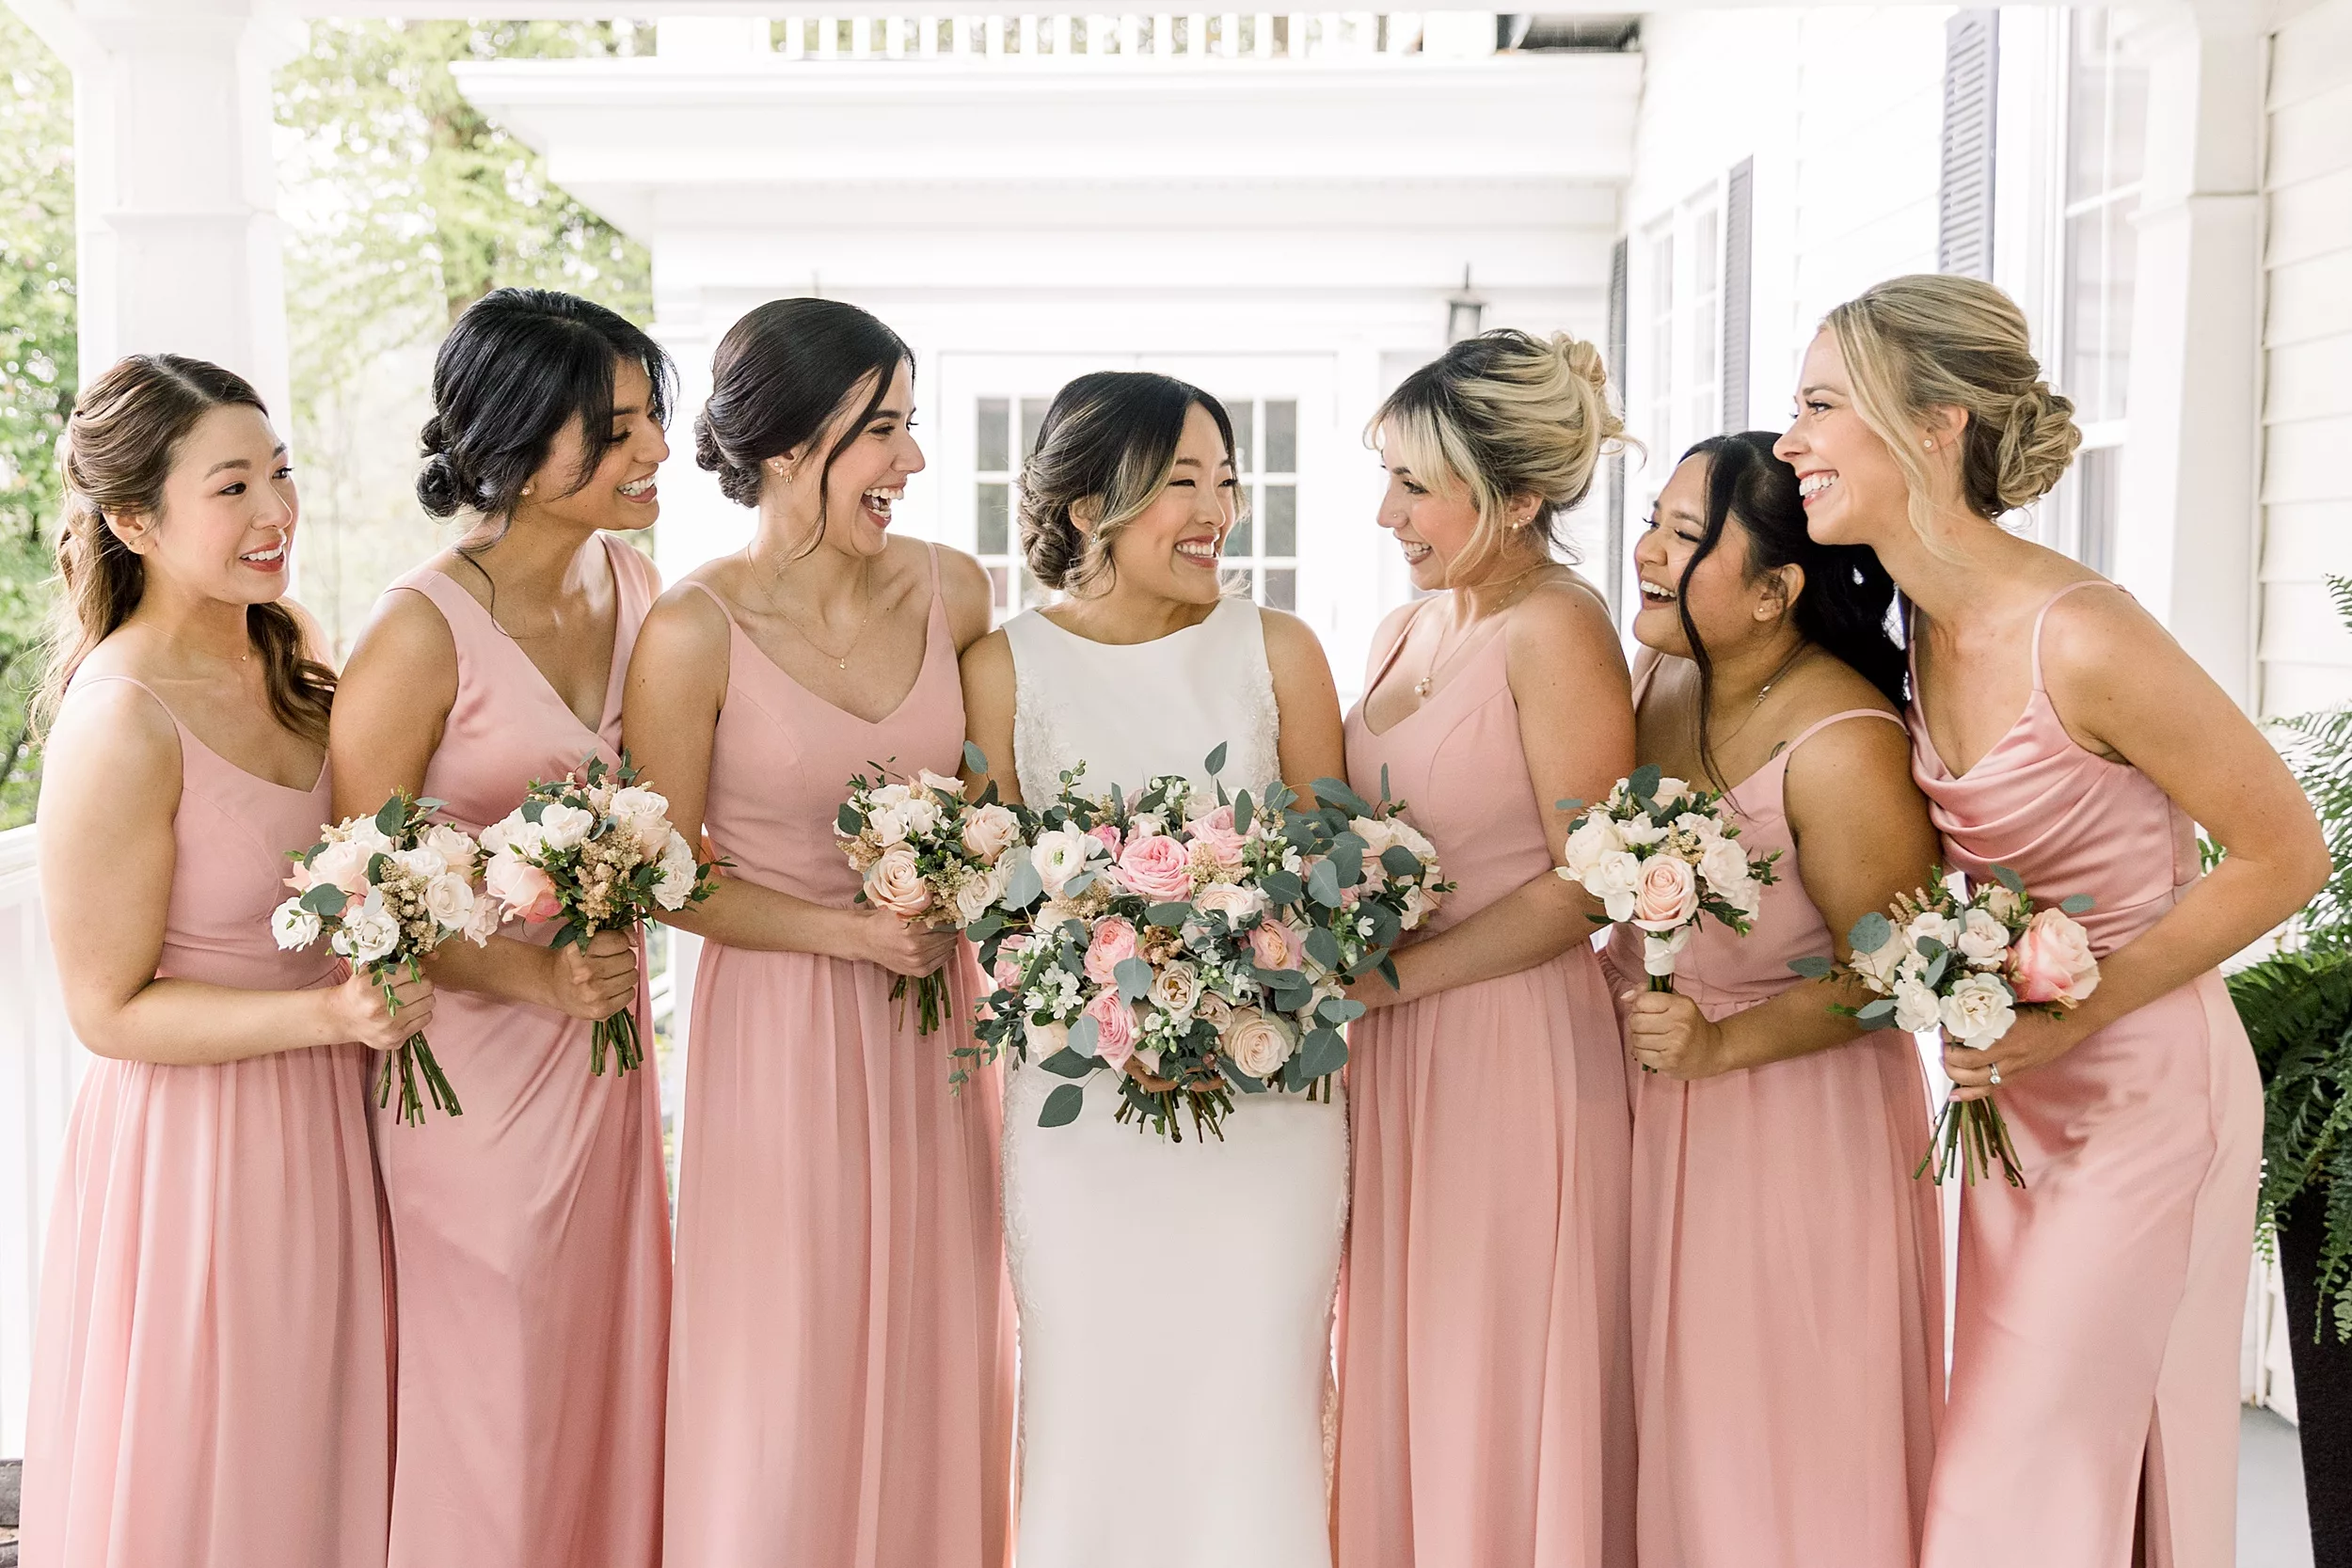 A bride holding her large pink bouquet stands on a porch with her bridesmaids all in pink dresses